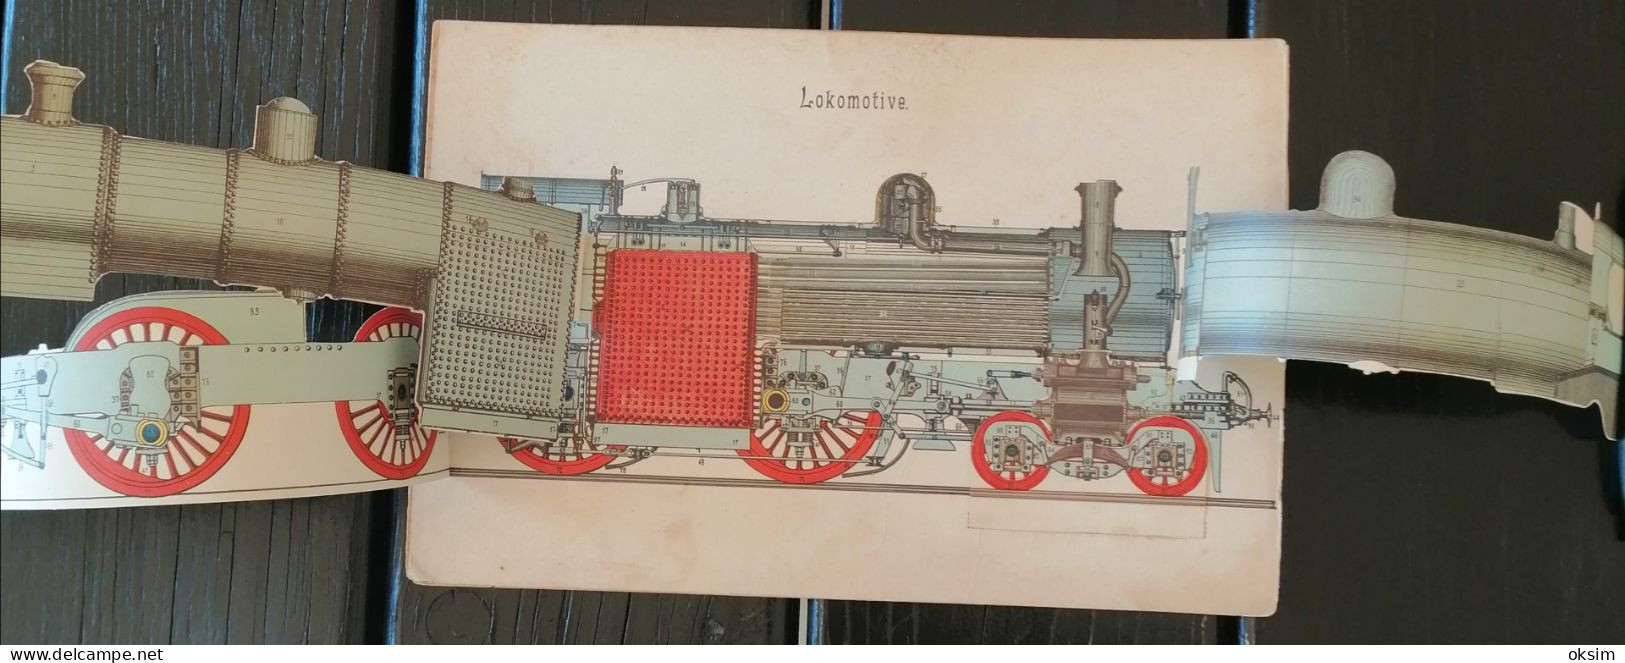 Drawings Of Machinery In Colour, Consisting Of Several Layers That Can Be Unfolded To Show The Interior Of The Machines - Macchine